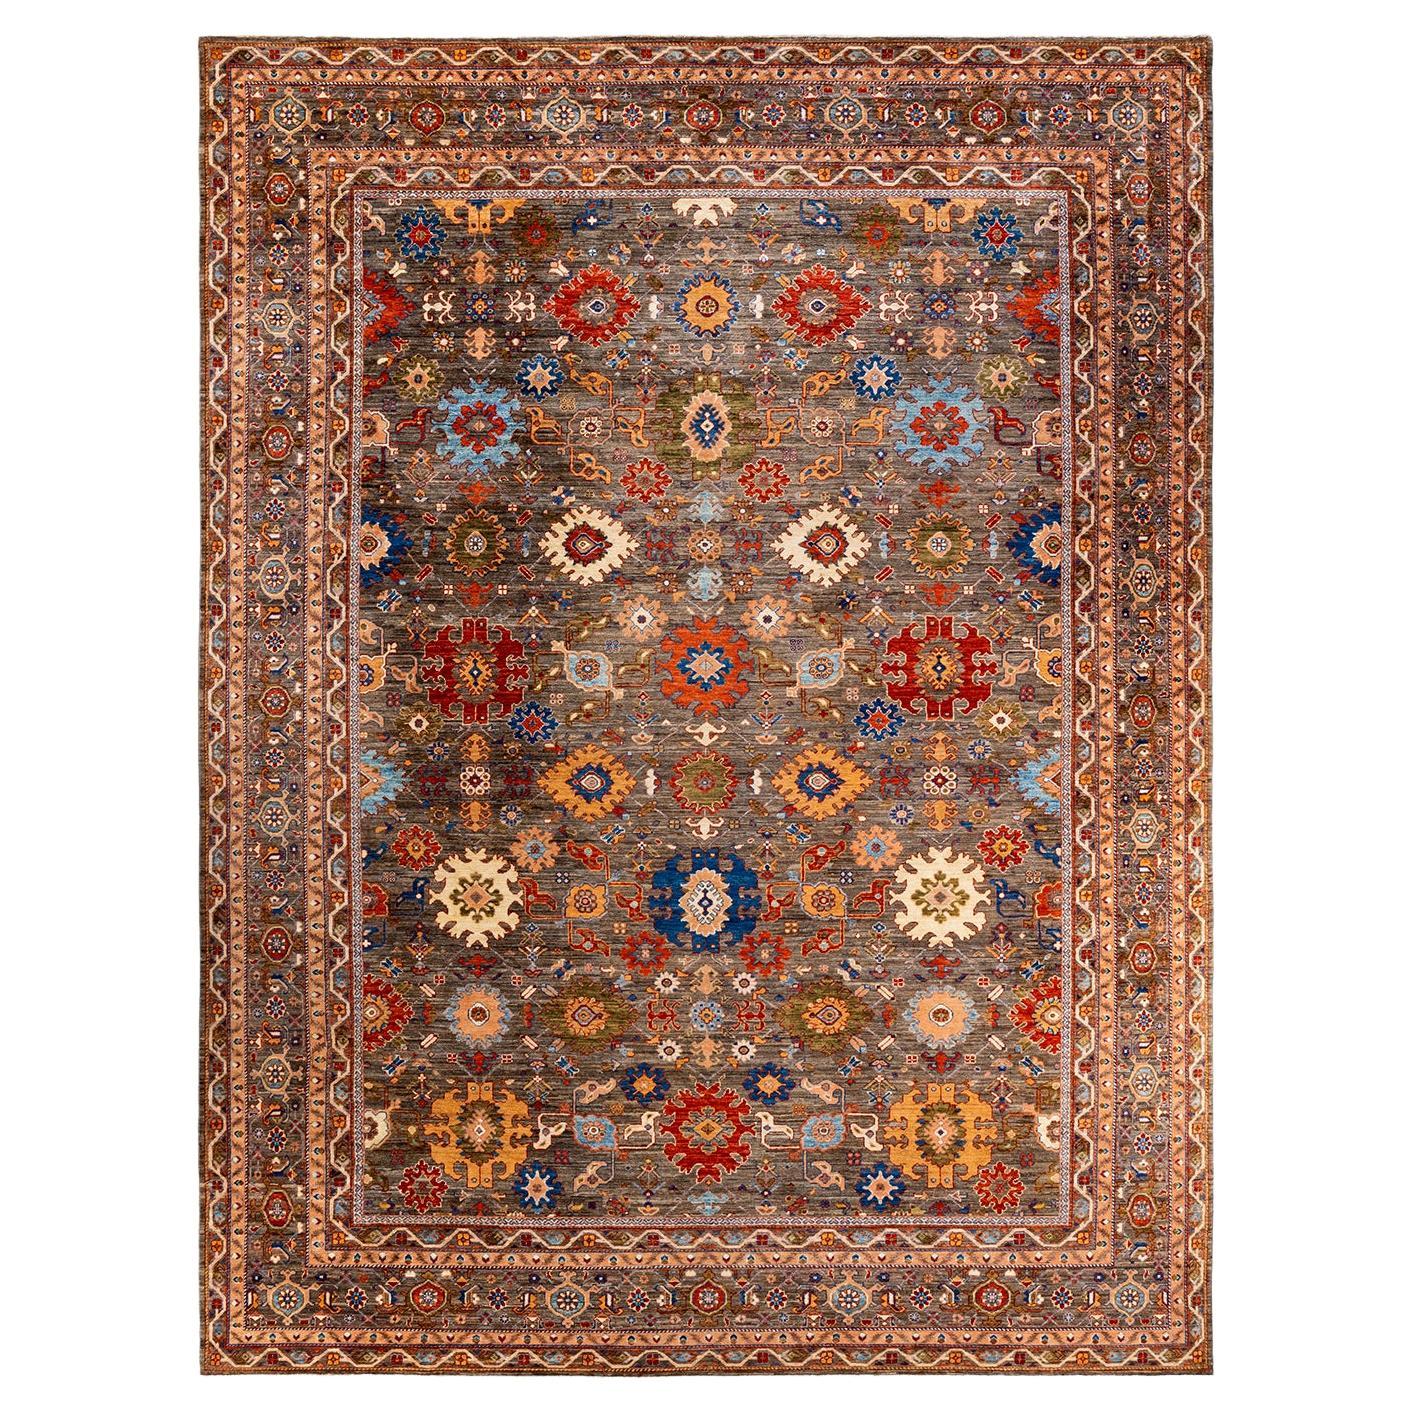 Serapi, One-of-a-Kind Hand-Knotted Runner Rug, Brown